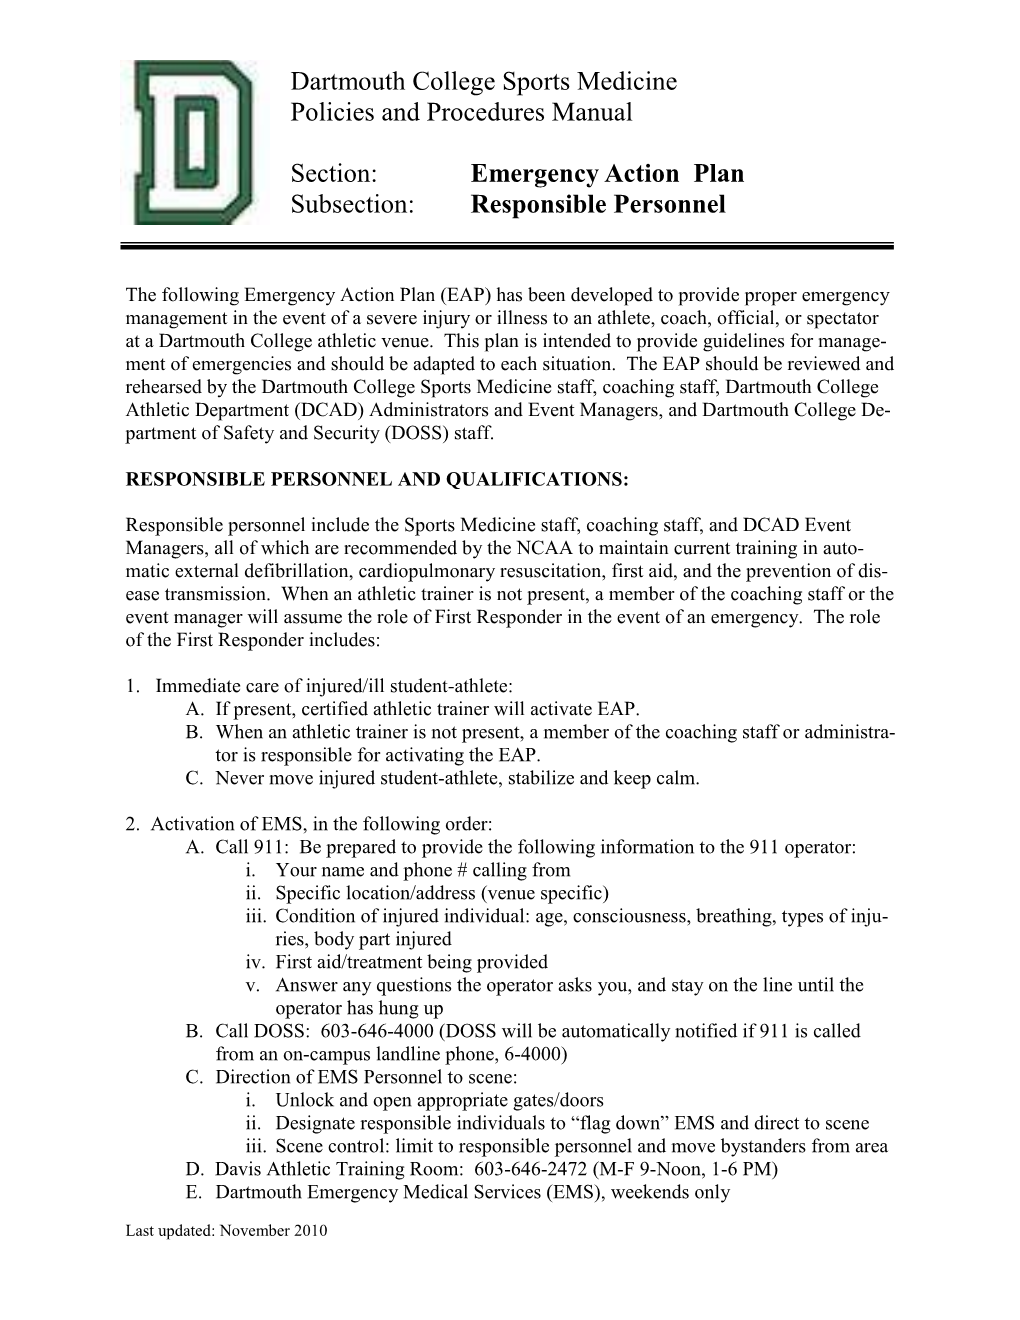 Emergency Action Plan Subsection: Responsible Personnel